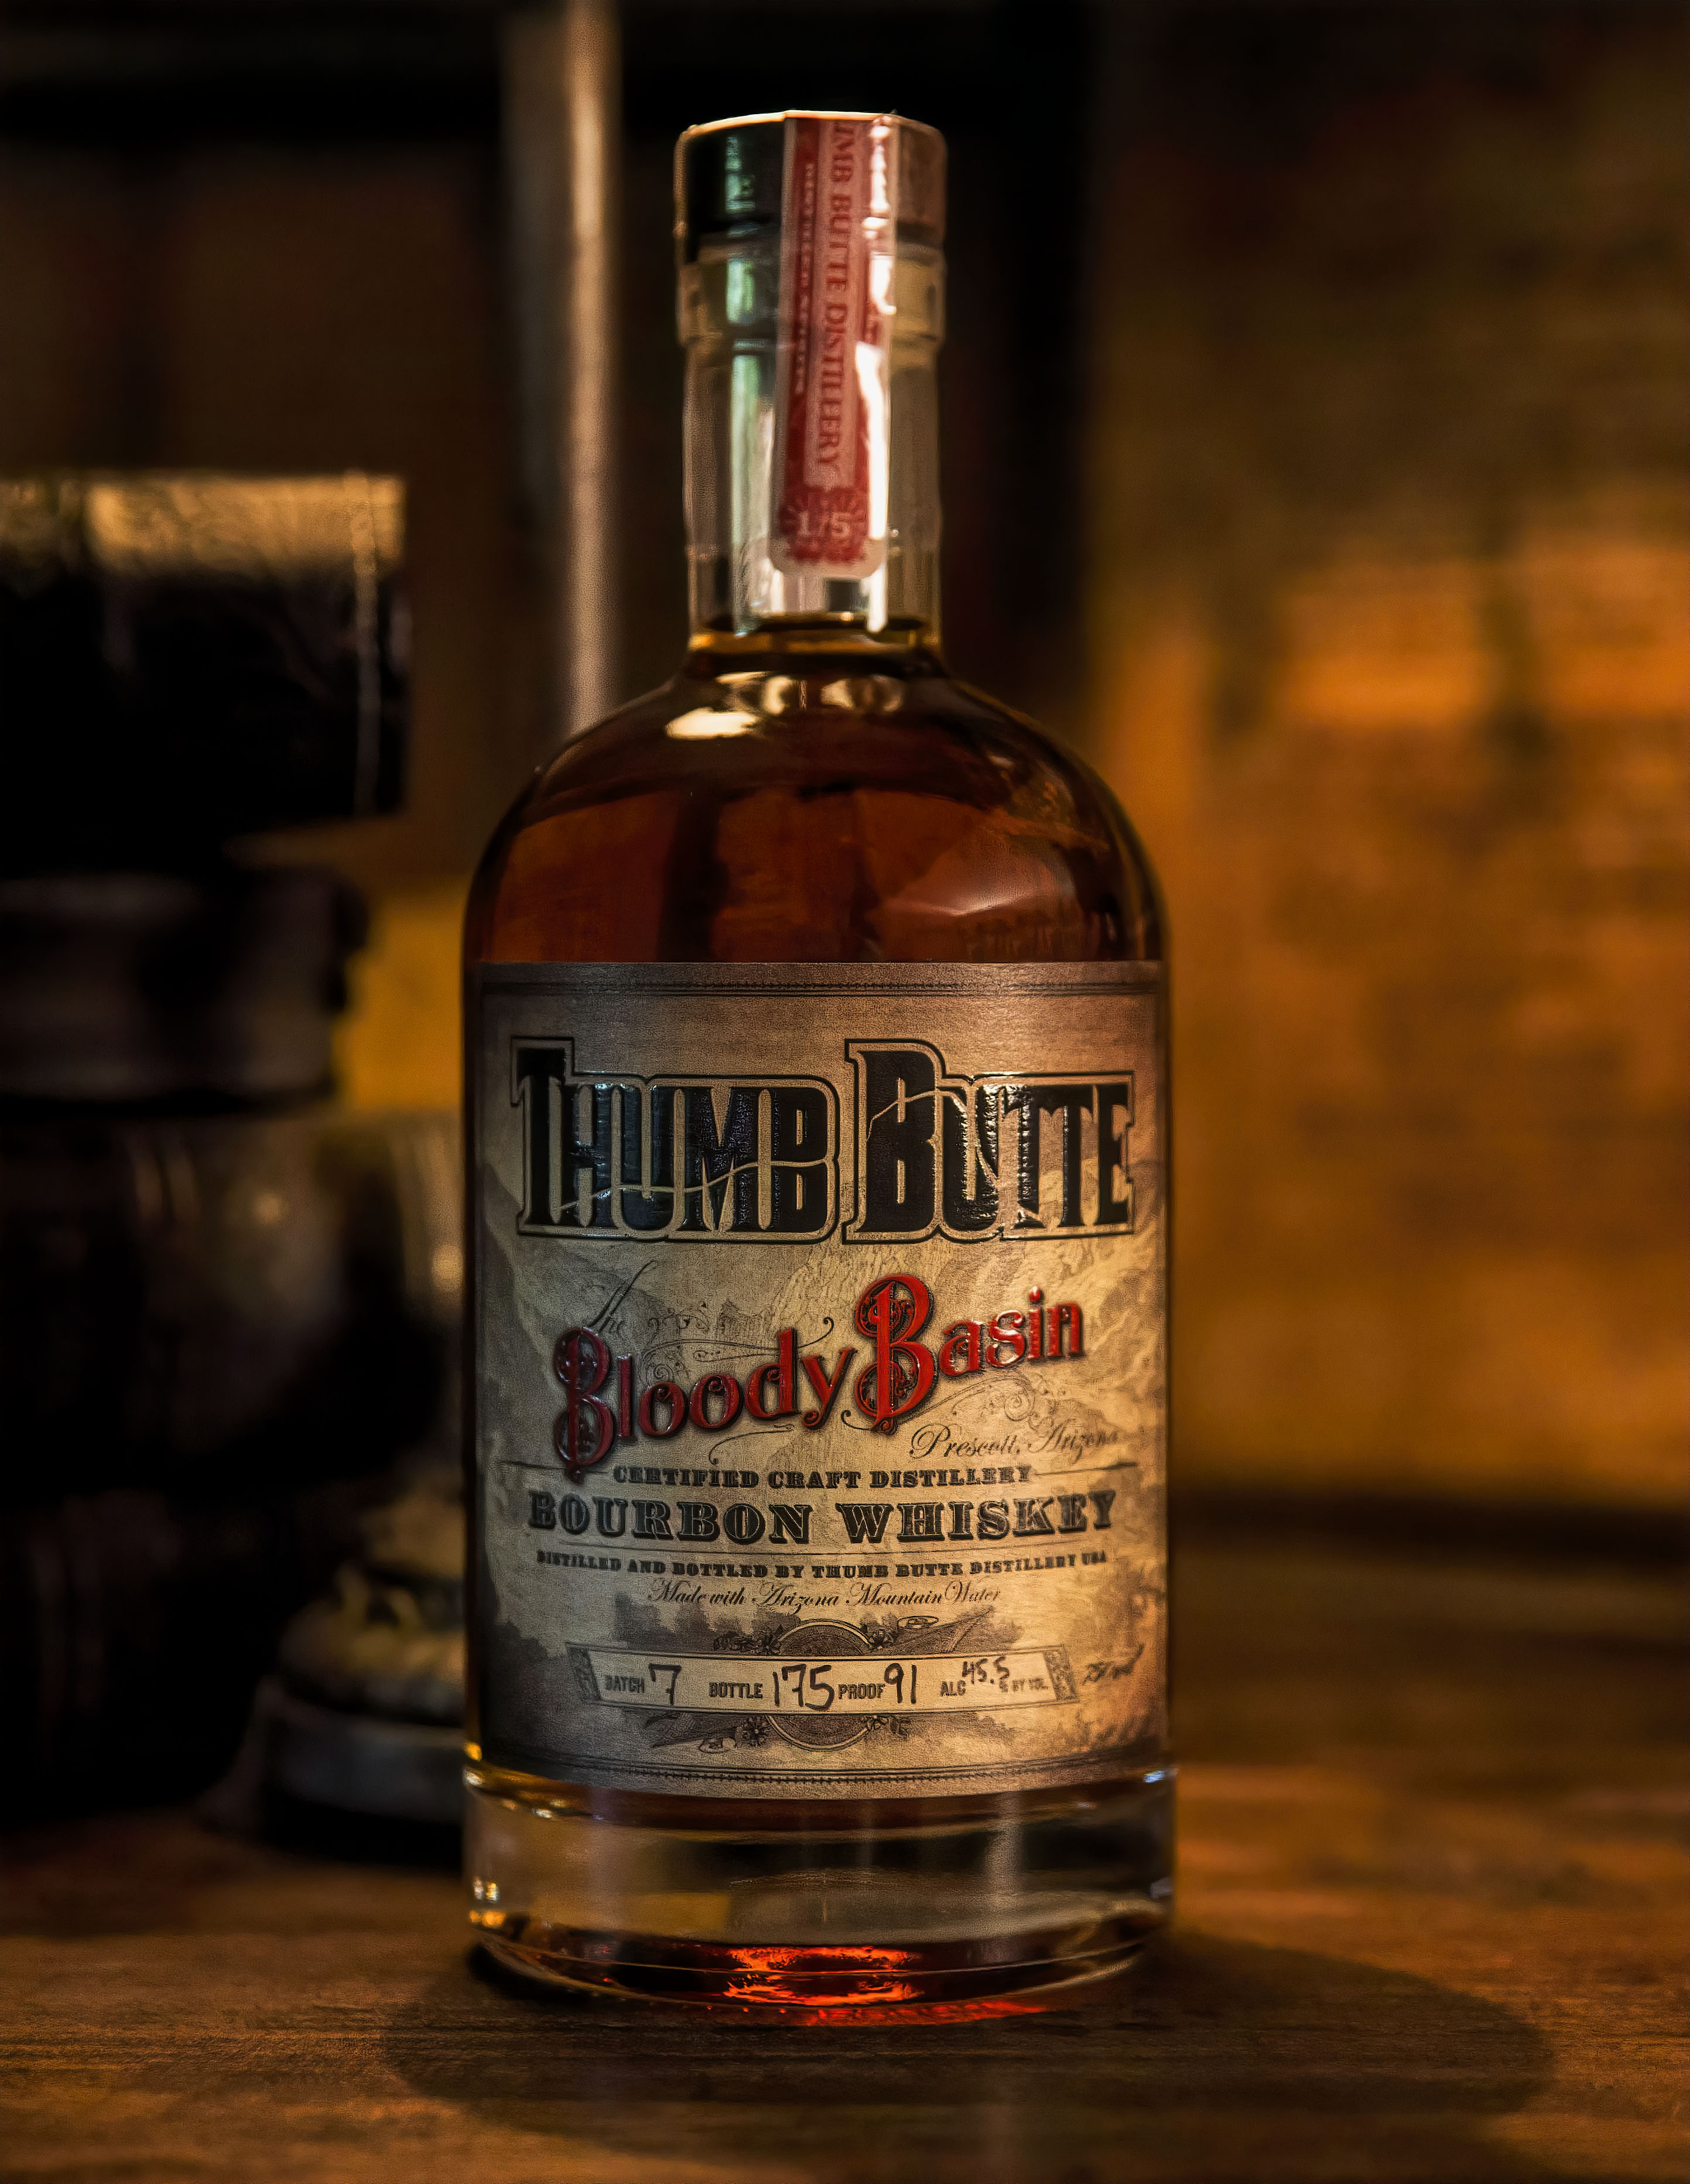 Label Design for Thumb Butte Distillery’s Bloody Basin Bourbon Whiskey